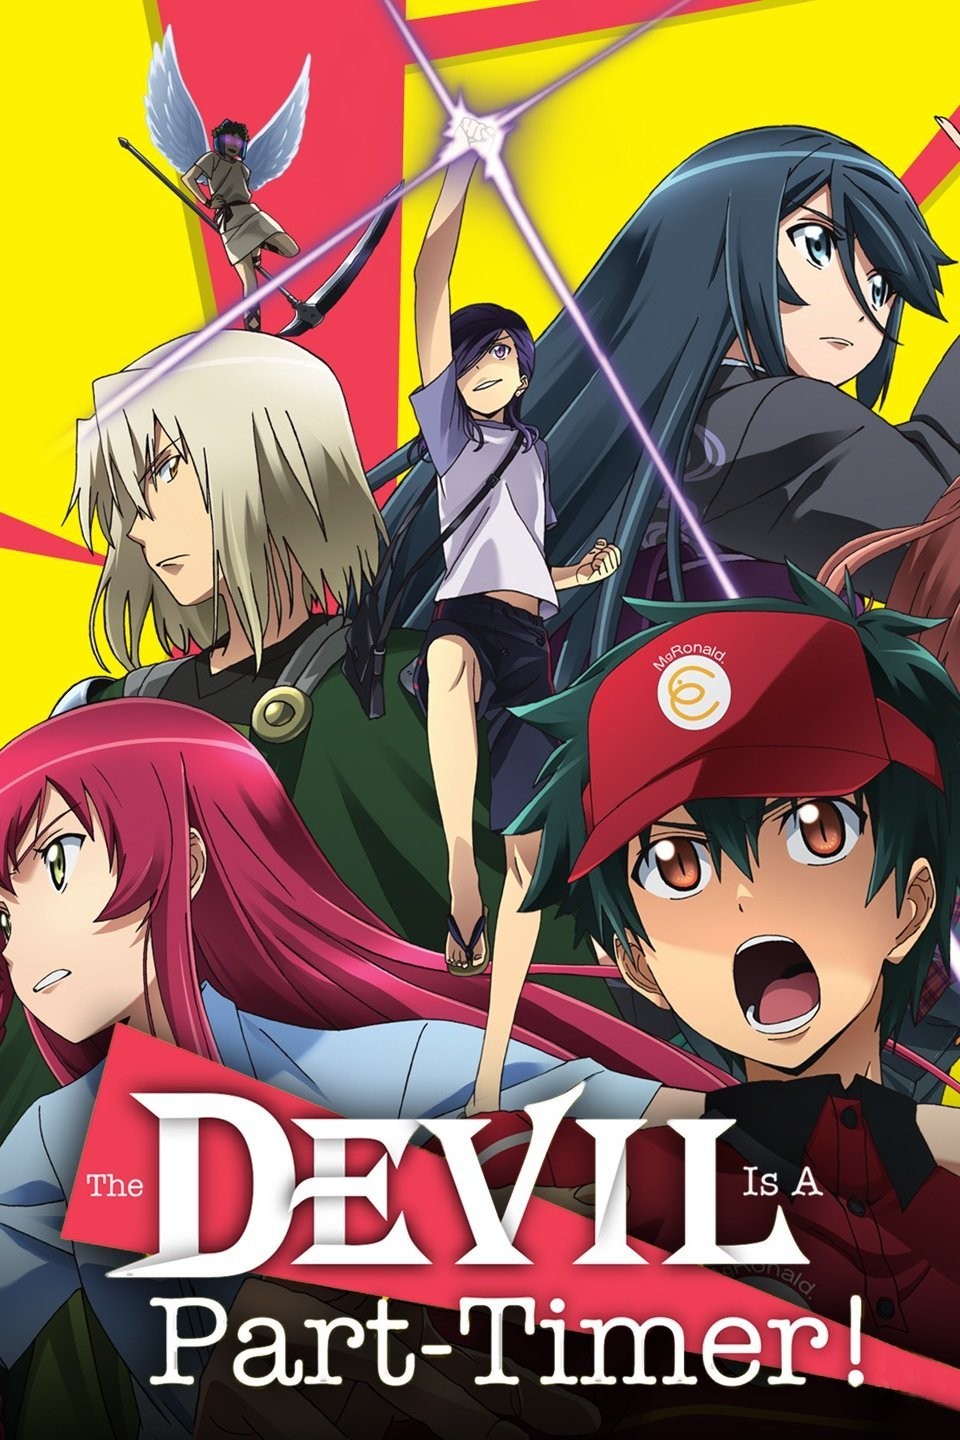 The Devil Is a Part-Timer!: Season 2, Episode 2 - Rotten Tomatoes